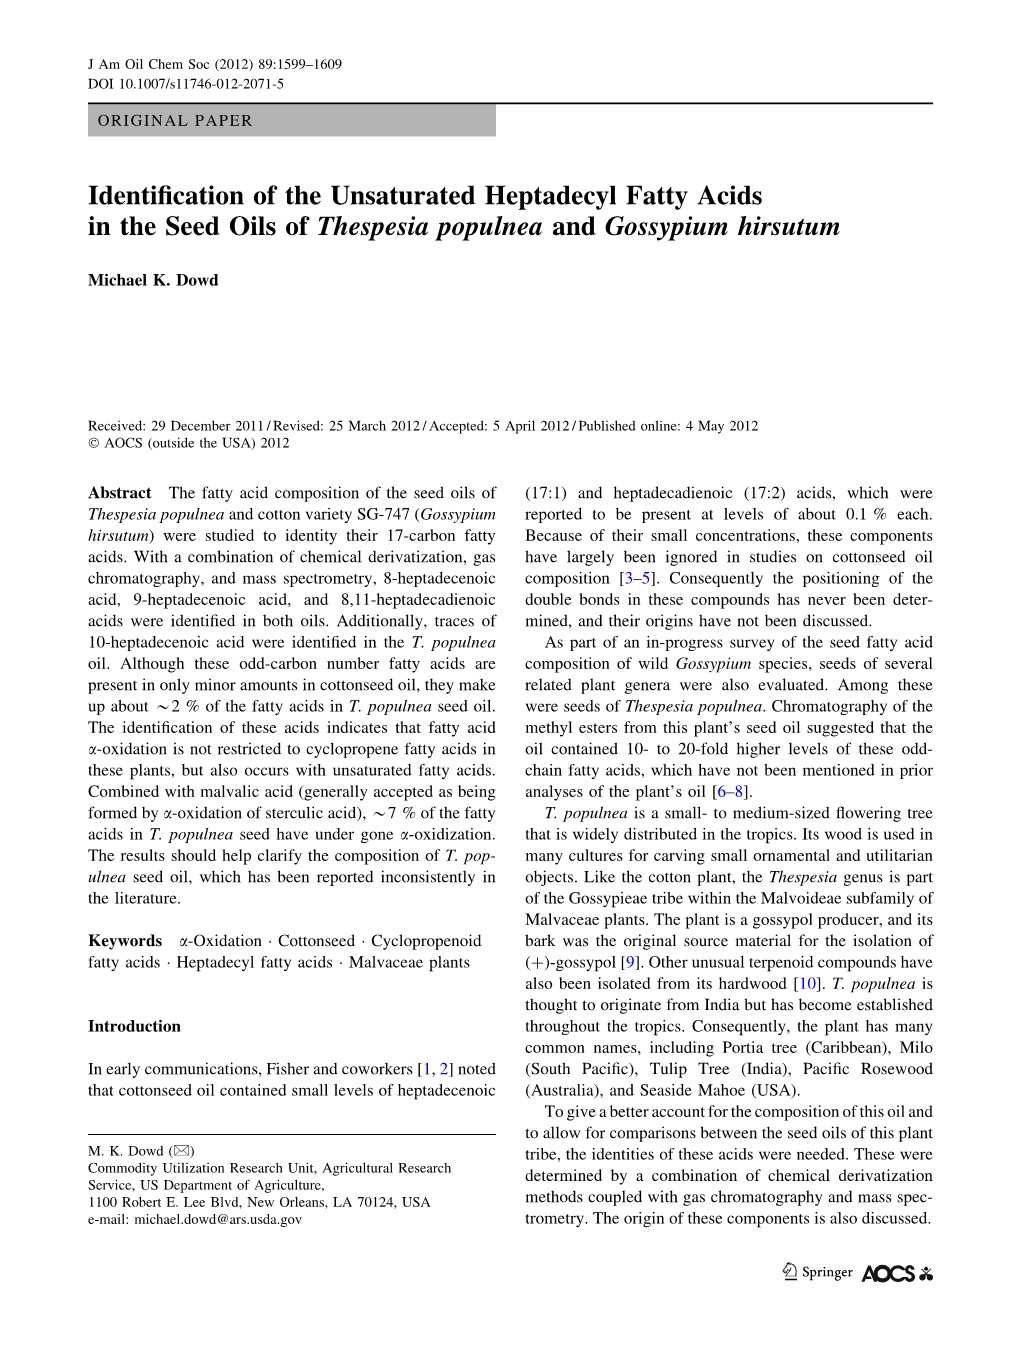 Identification of the Unsaturated Heptadecyl Fatty Acids in the Seed